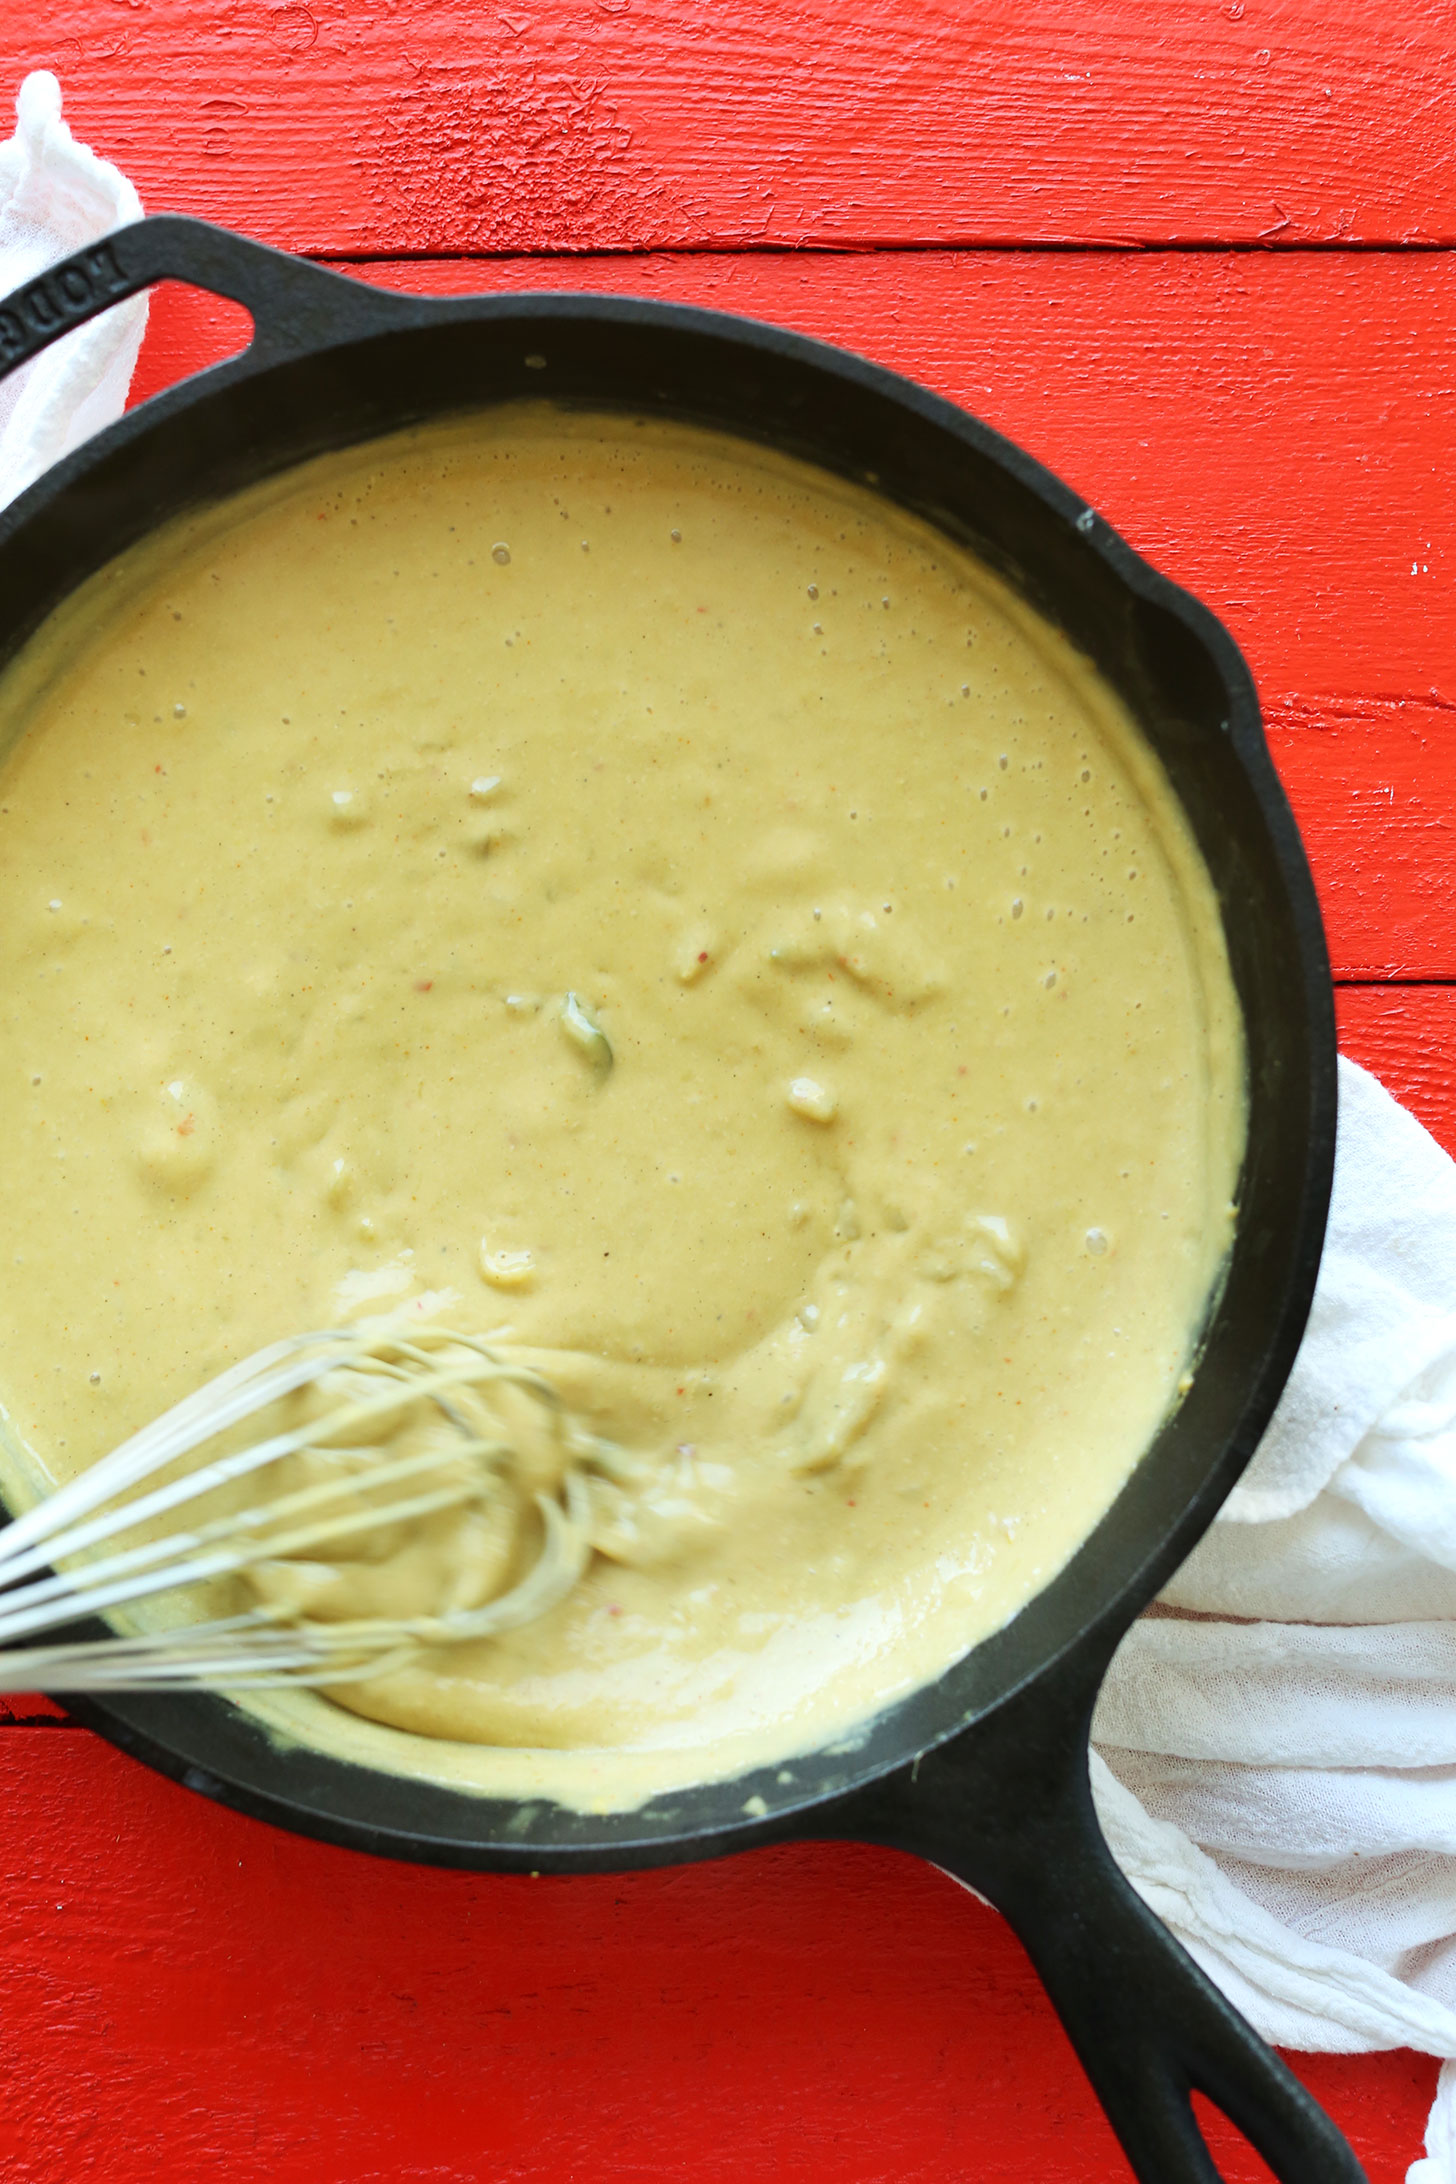 Whisking a pan of our Green Chili Queso sauce for a spicy vegan appetizer